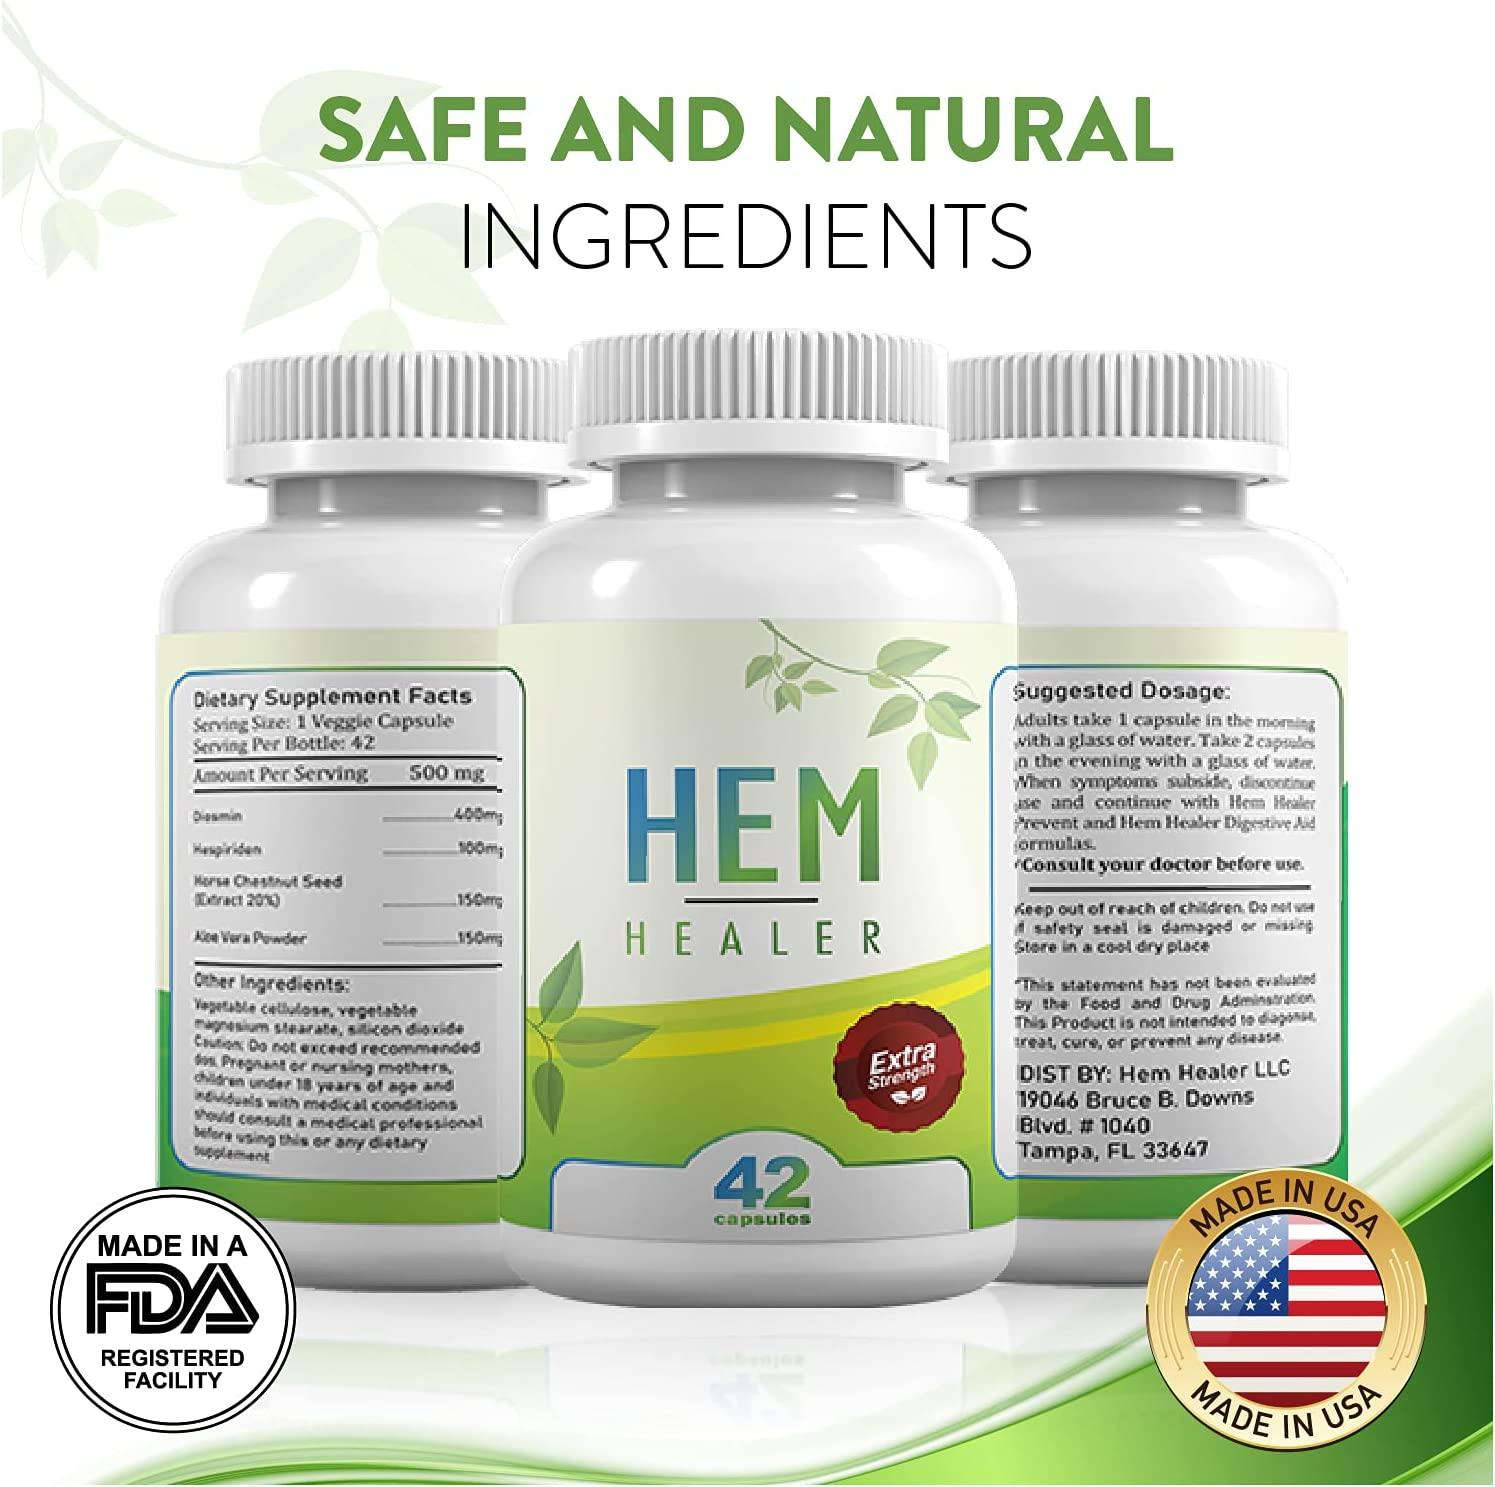 Hem Healer Hemorrhoid Treatment For Hemorrhoid Relief Reduce Swelling And Inflammation Soothe 0367